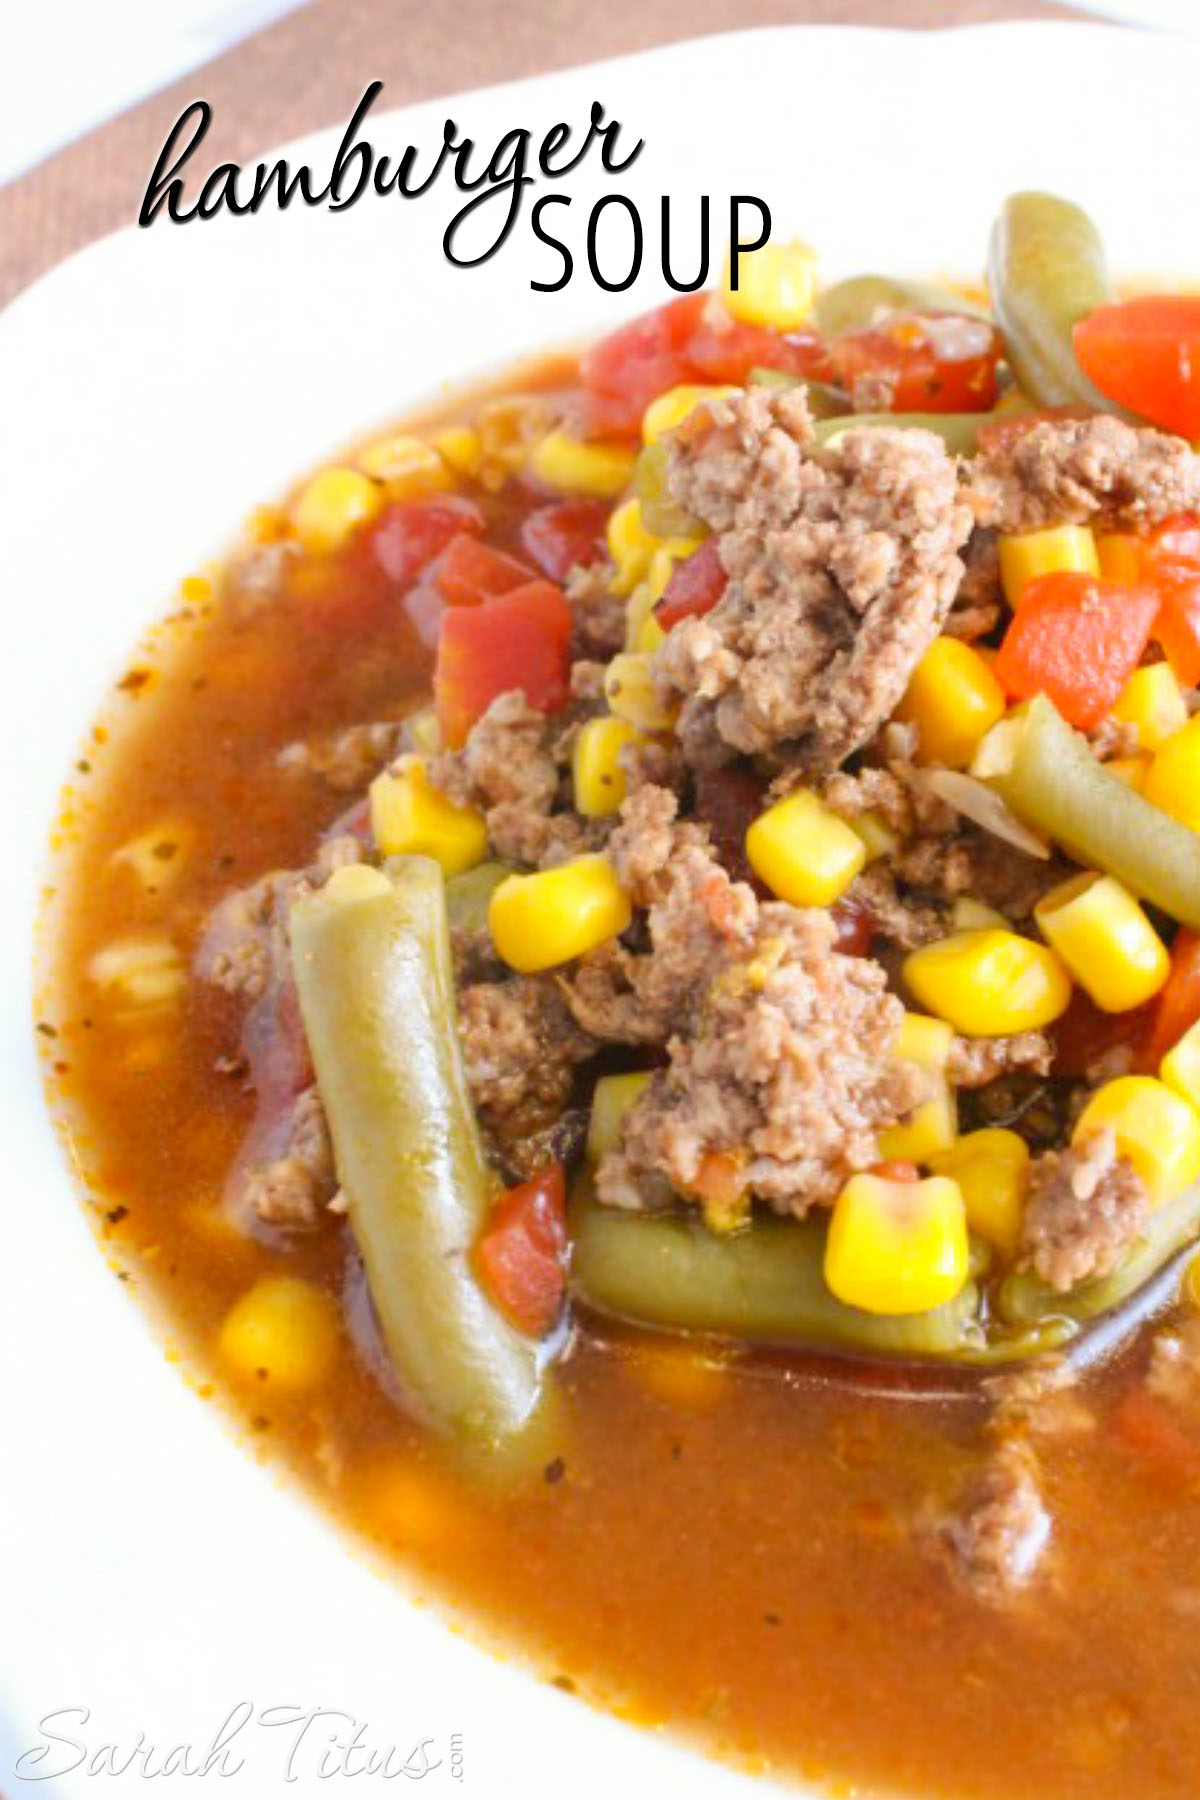 One of our family's favorite go-to meals, this quick & easy hamburger veggie soup is sure to put smiles on faces and warmth in tummies!